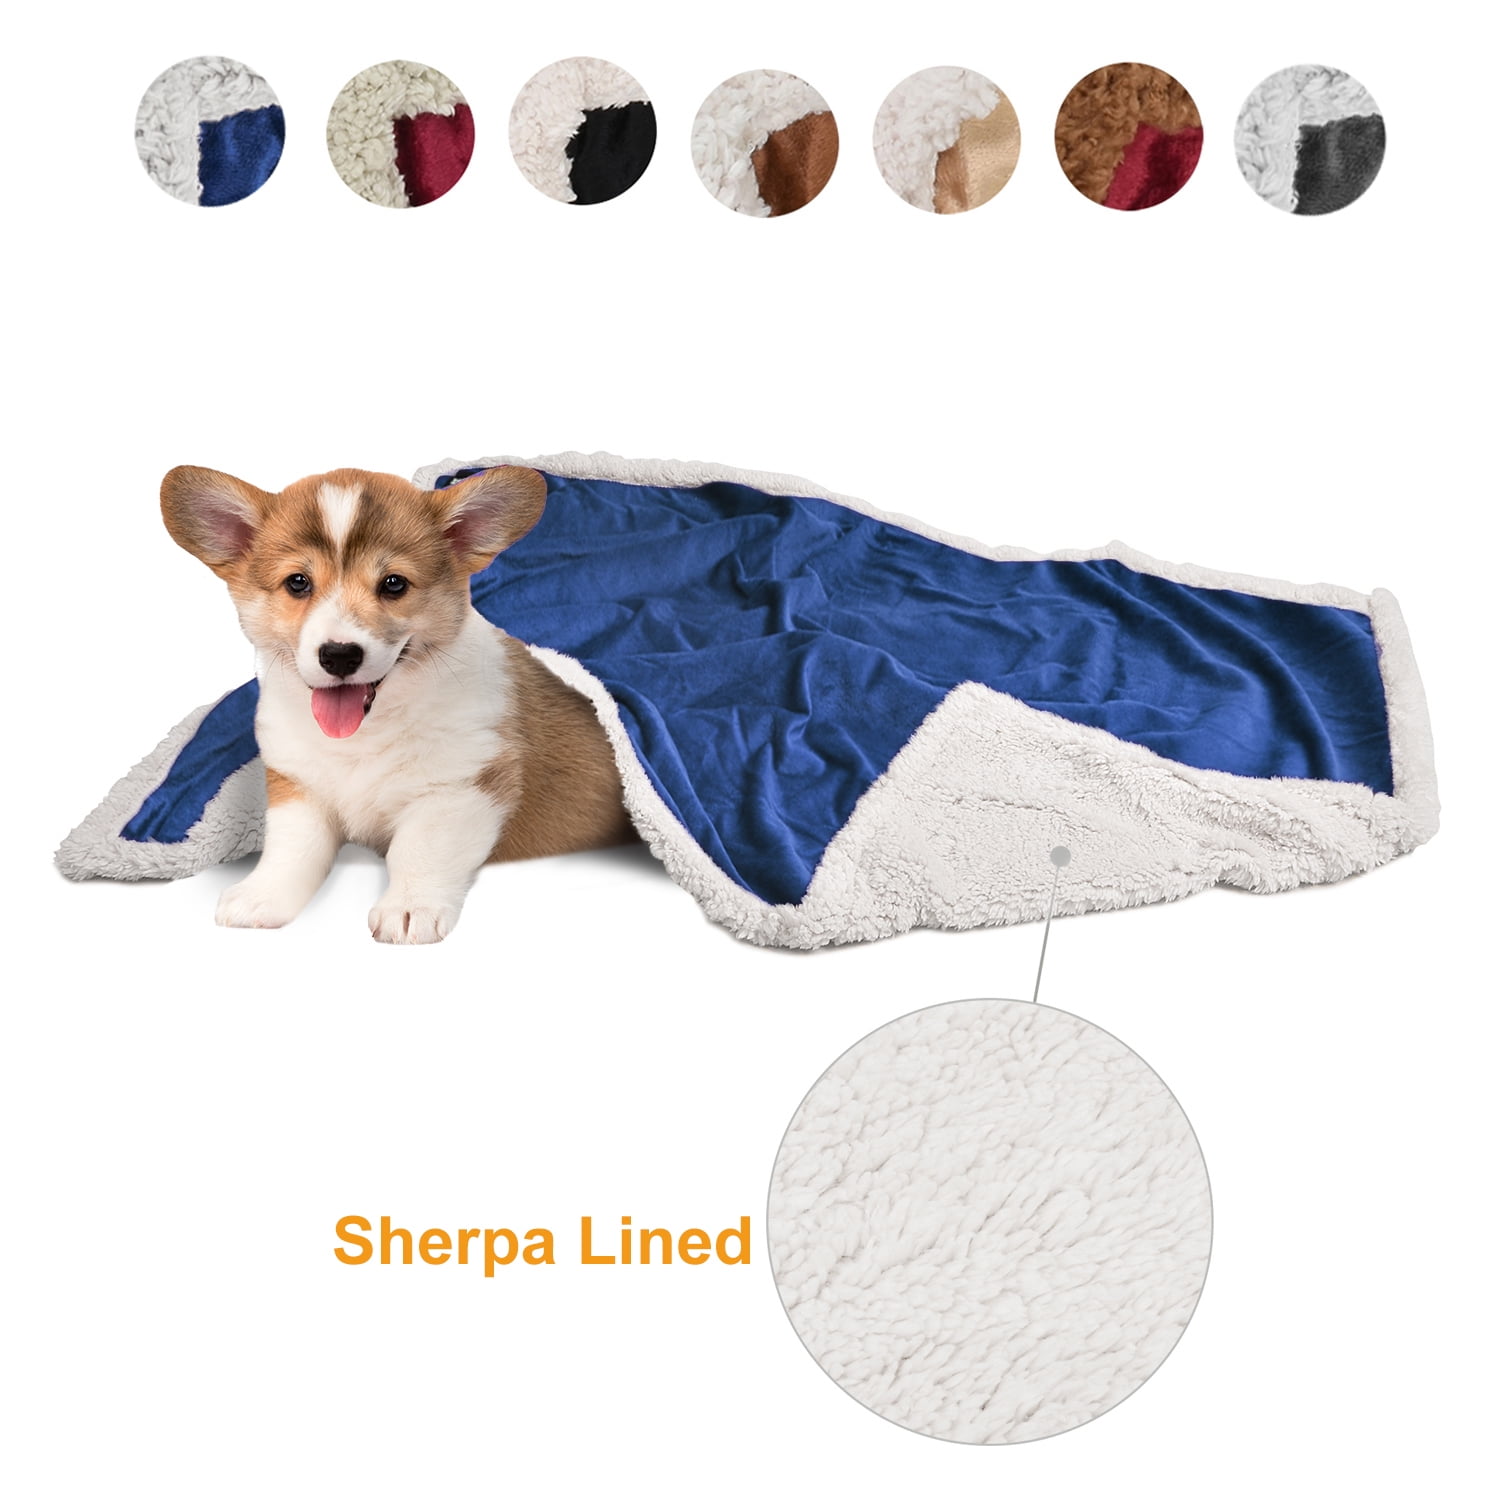 Pawsse Dog Blanket,Super Soft Sherpa Pet Blankets and Throws Sleeping Mat for Small Medium Doggies Puppy Animals 45x30